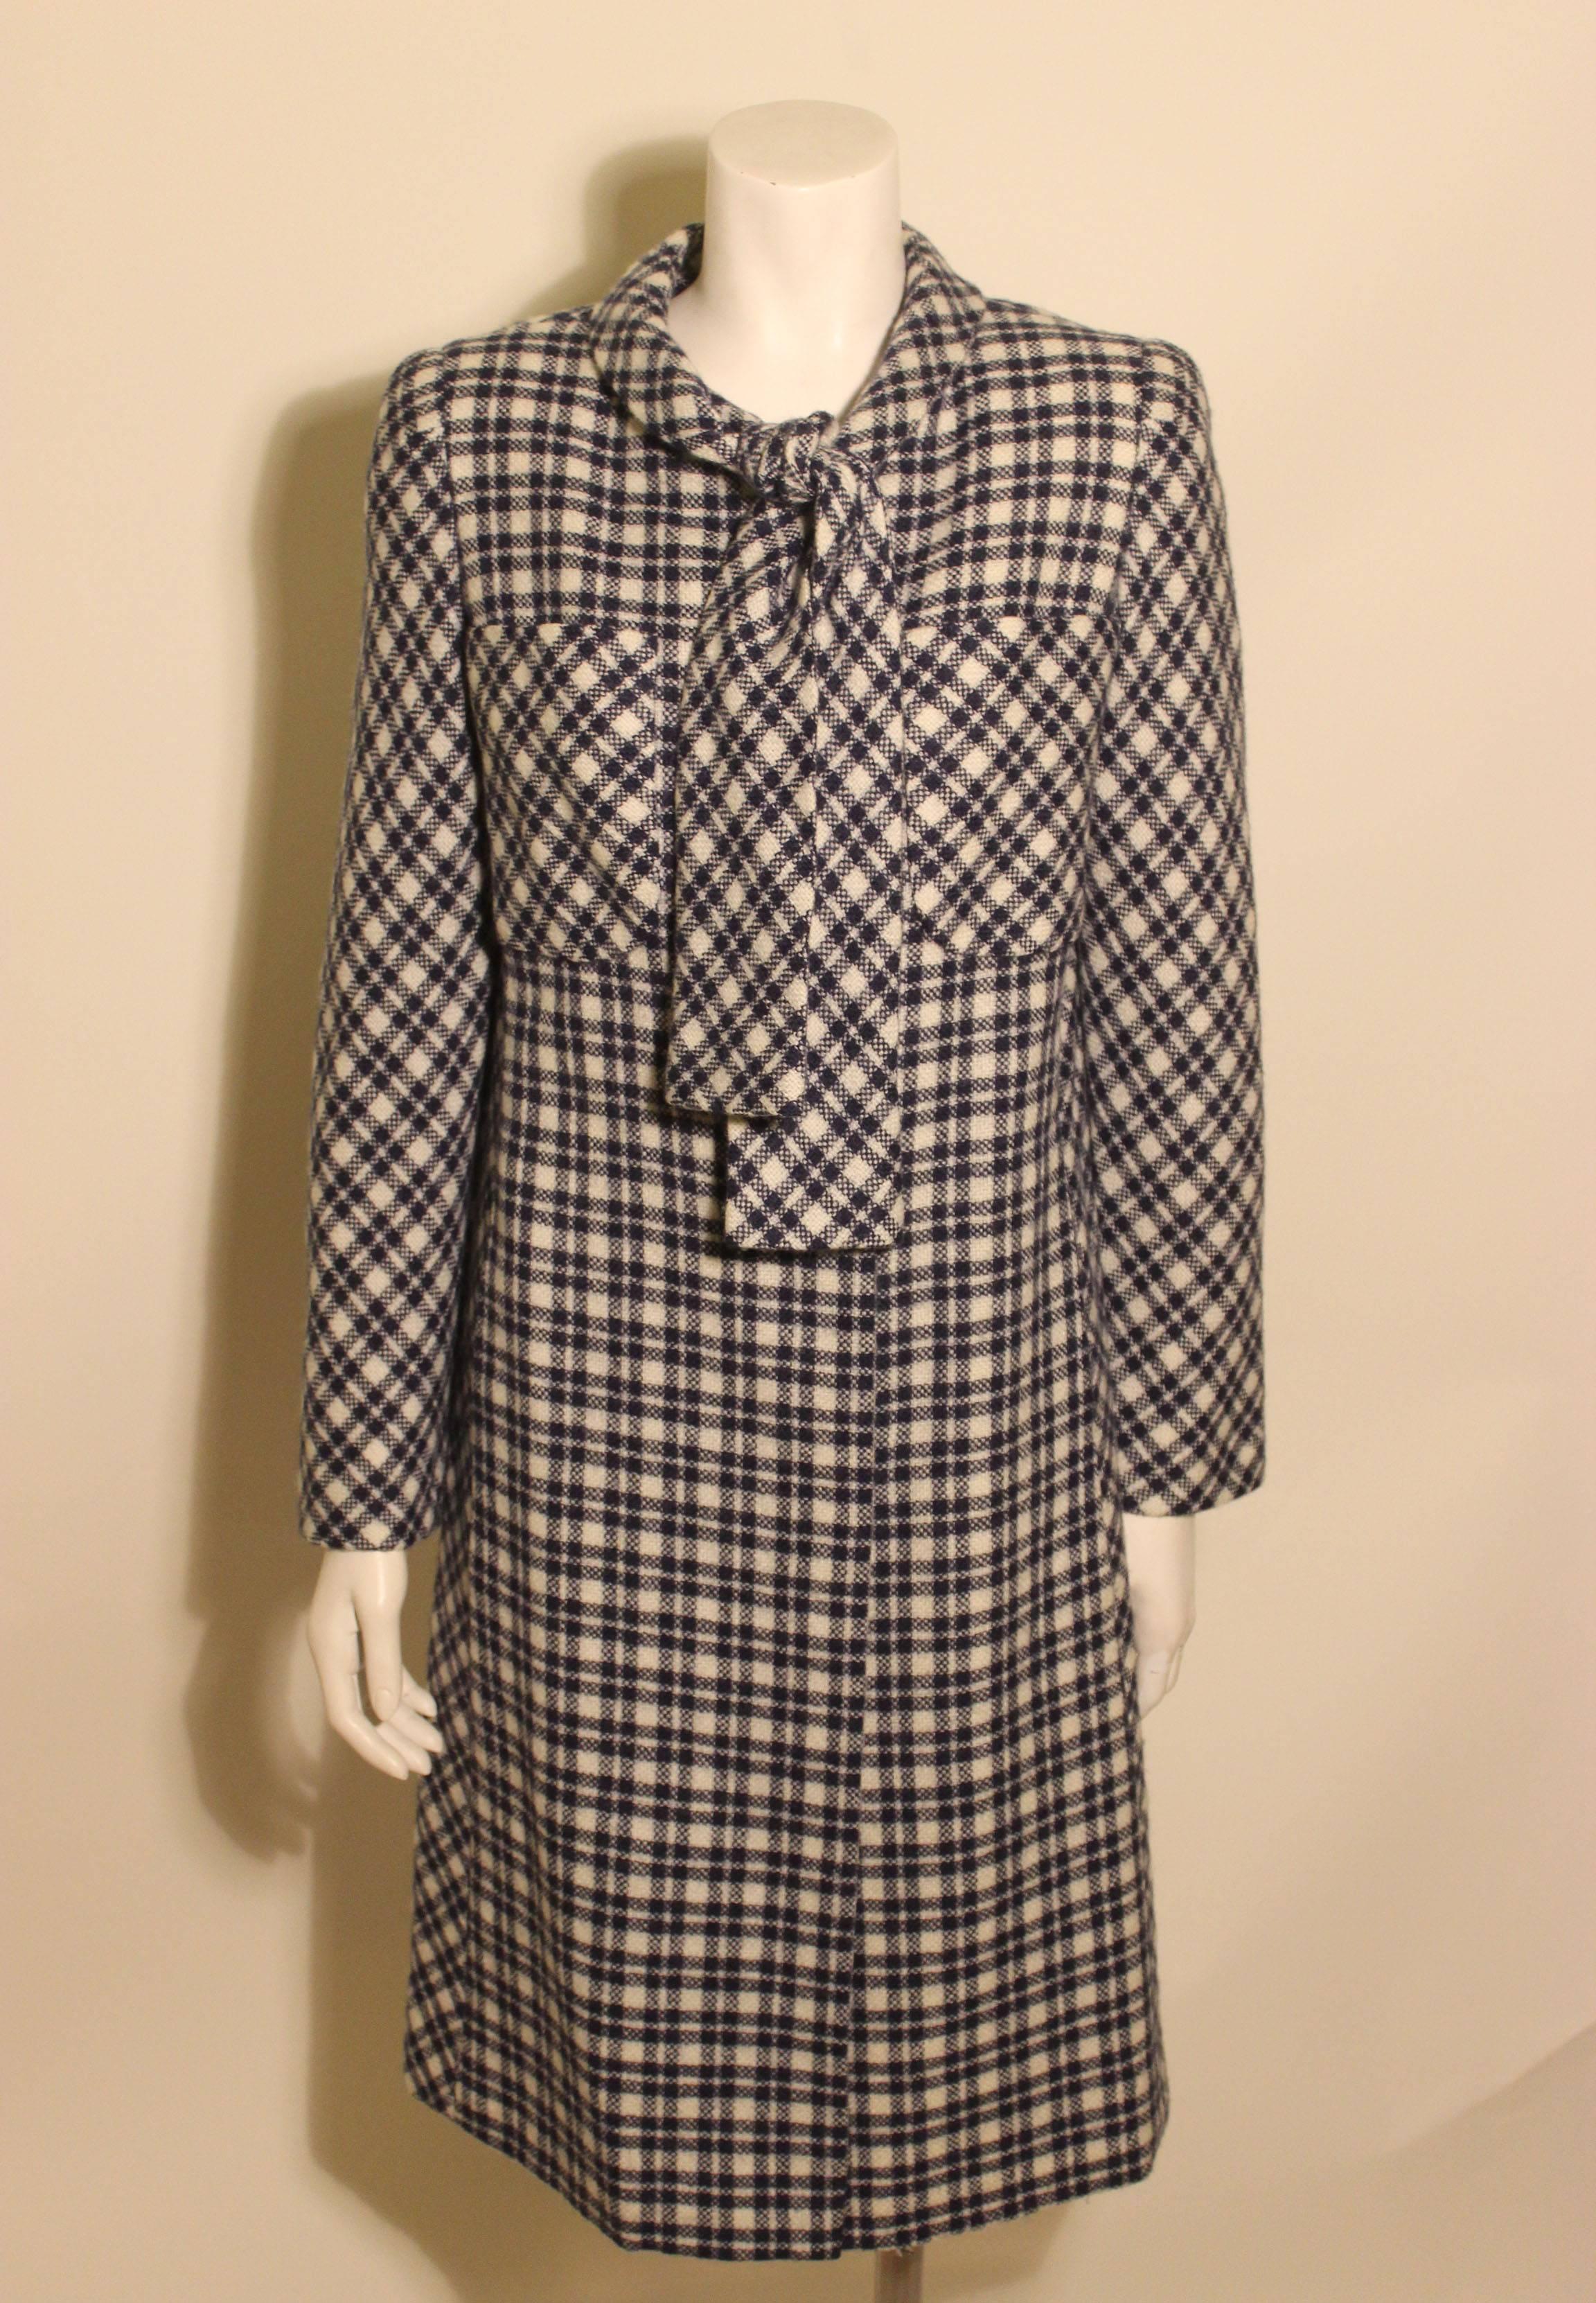 1960s style Pauline Trigere coat in a bold navy check with an attached scarf/tie at the stand up necklace. There are two patch pockets above the bustline. 